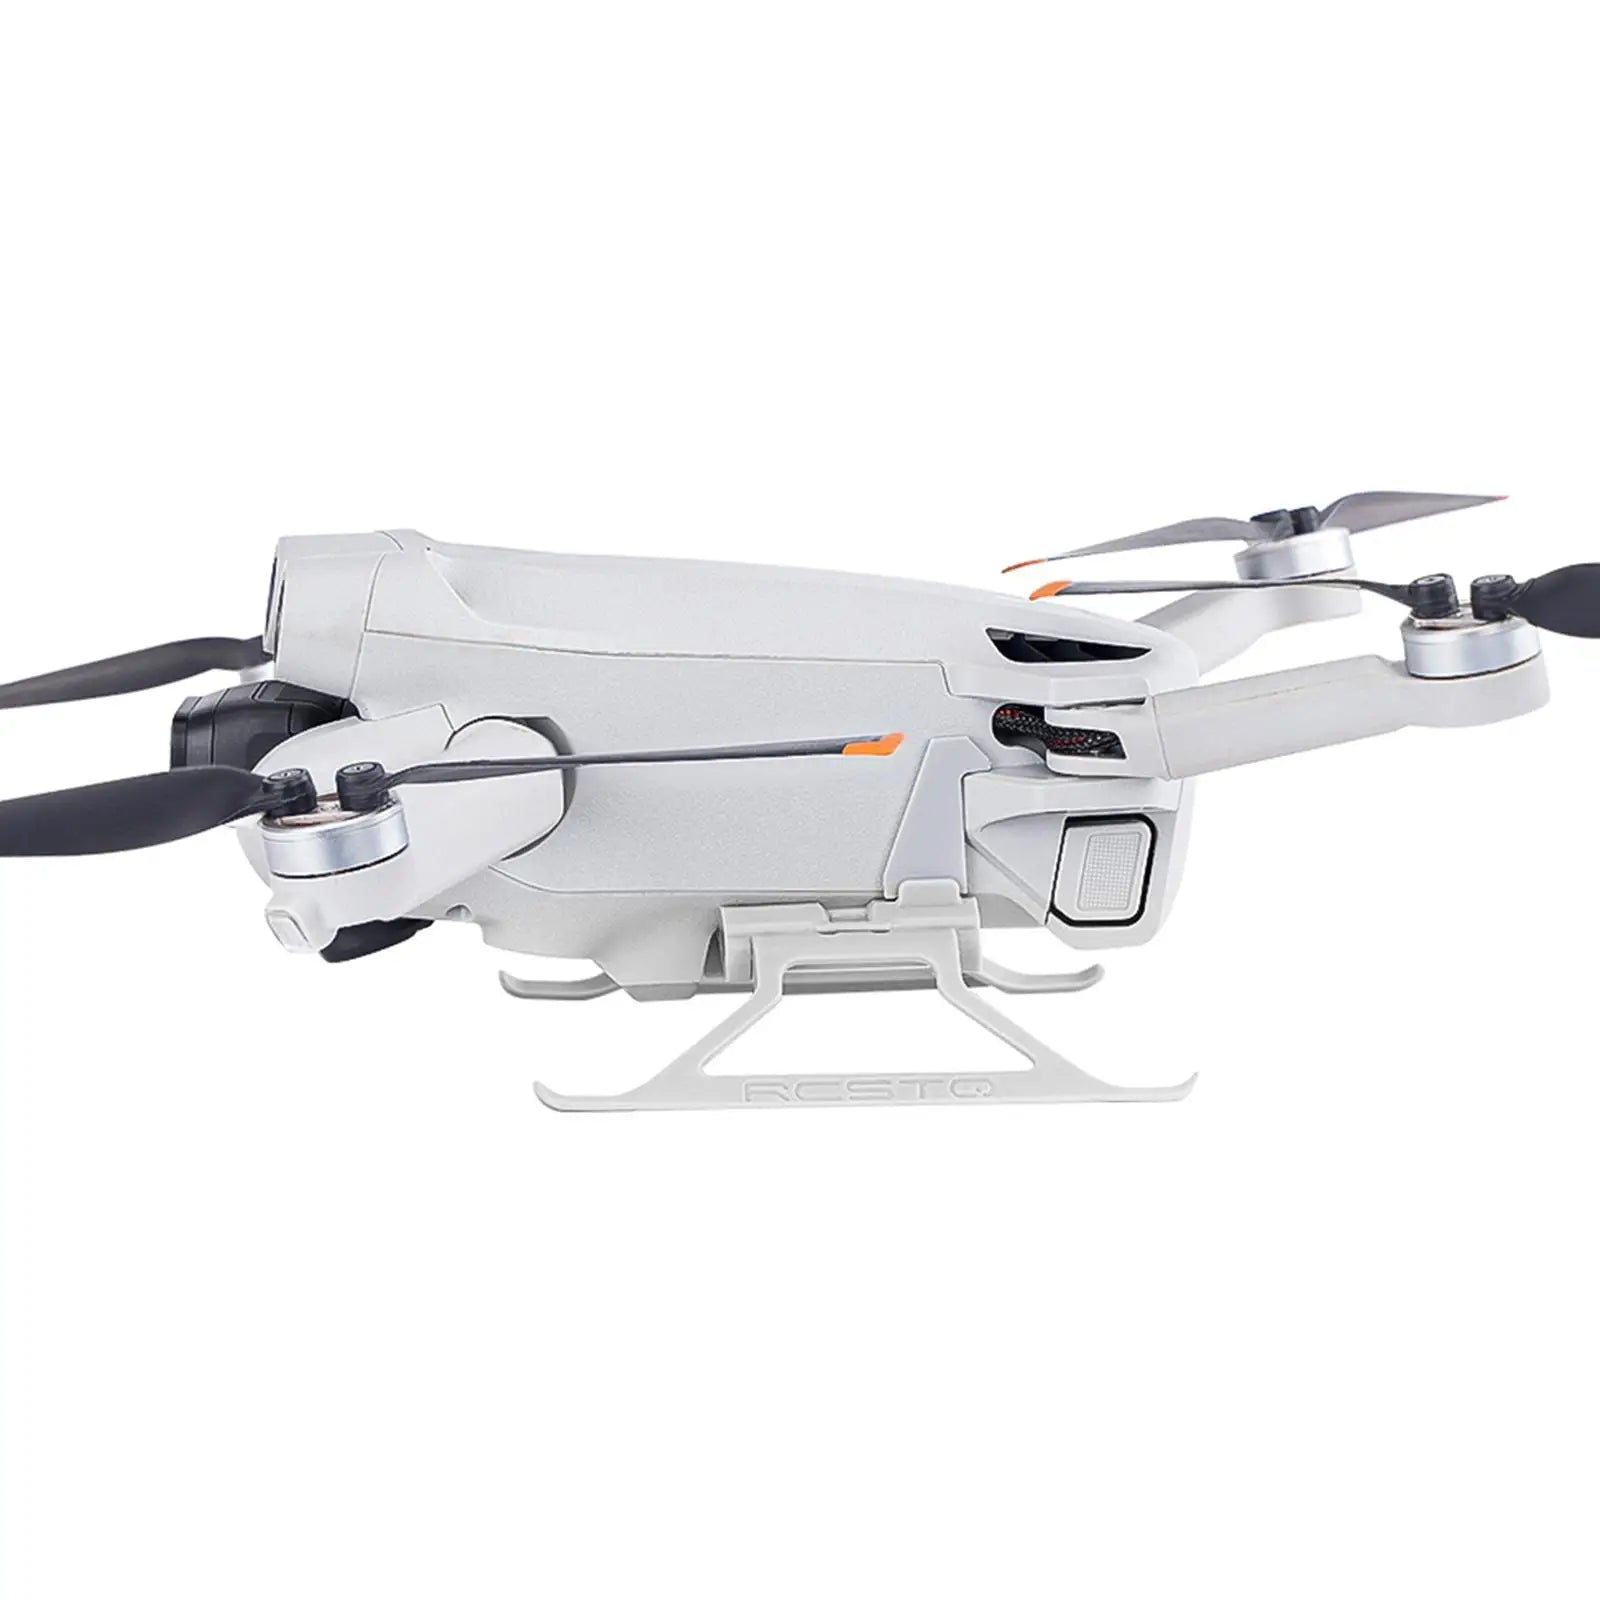 BRDRC Aircraf is a drone manufacturer based in Mainland china .